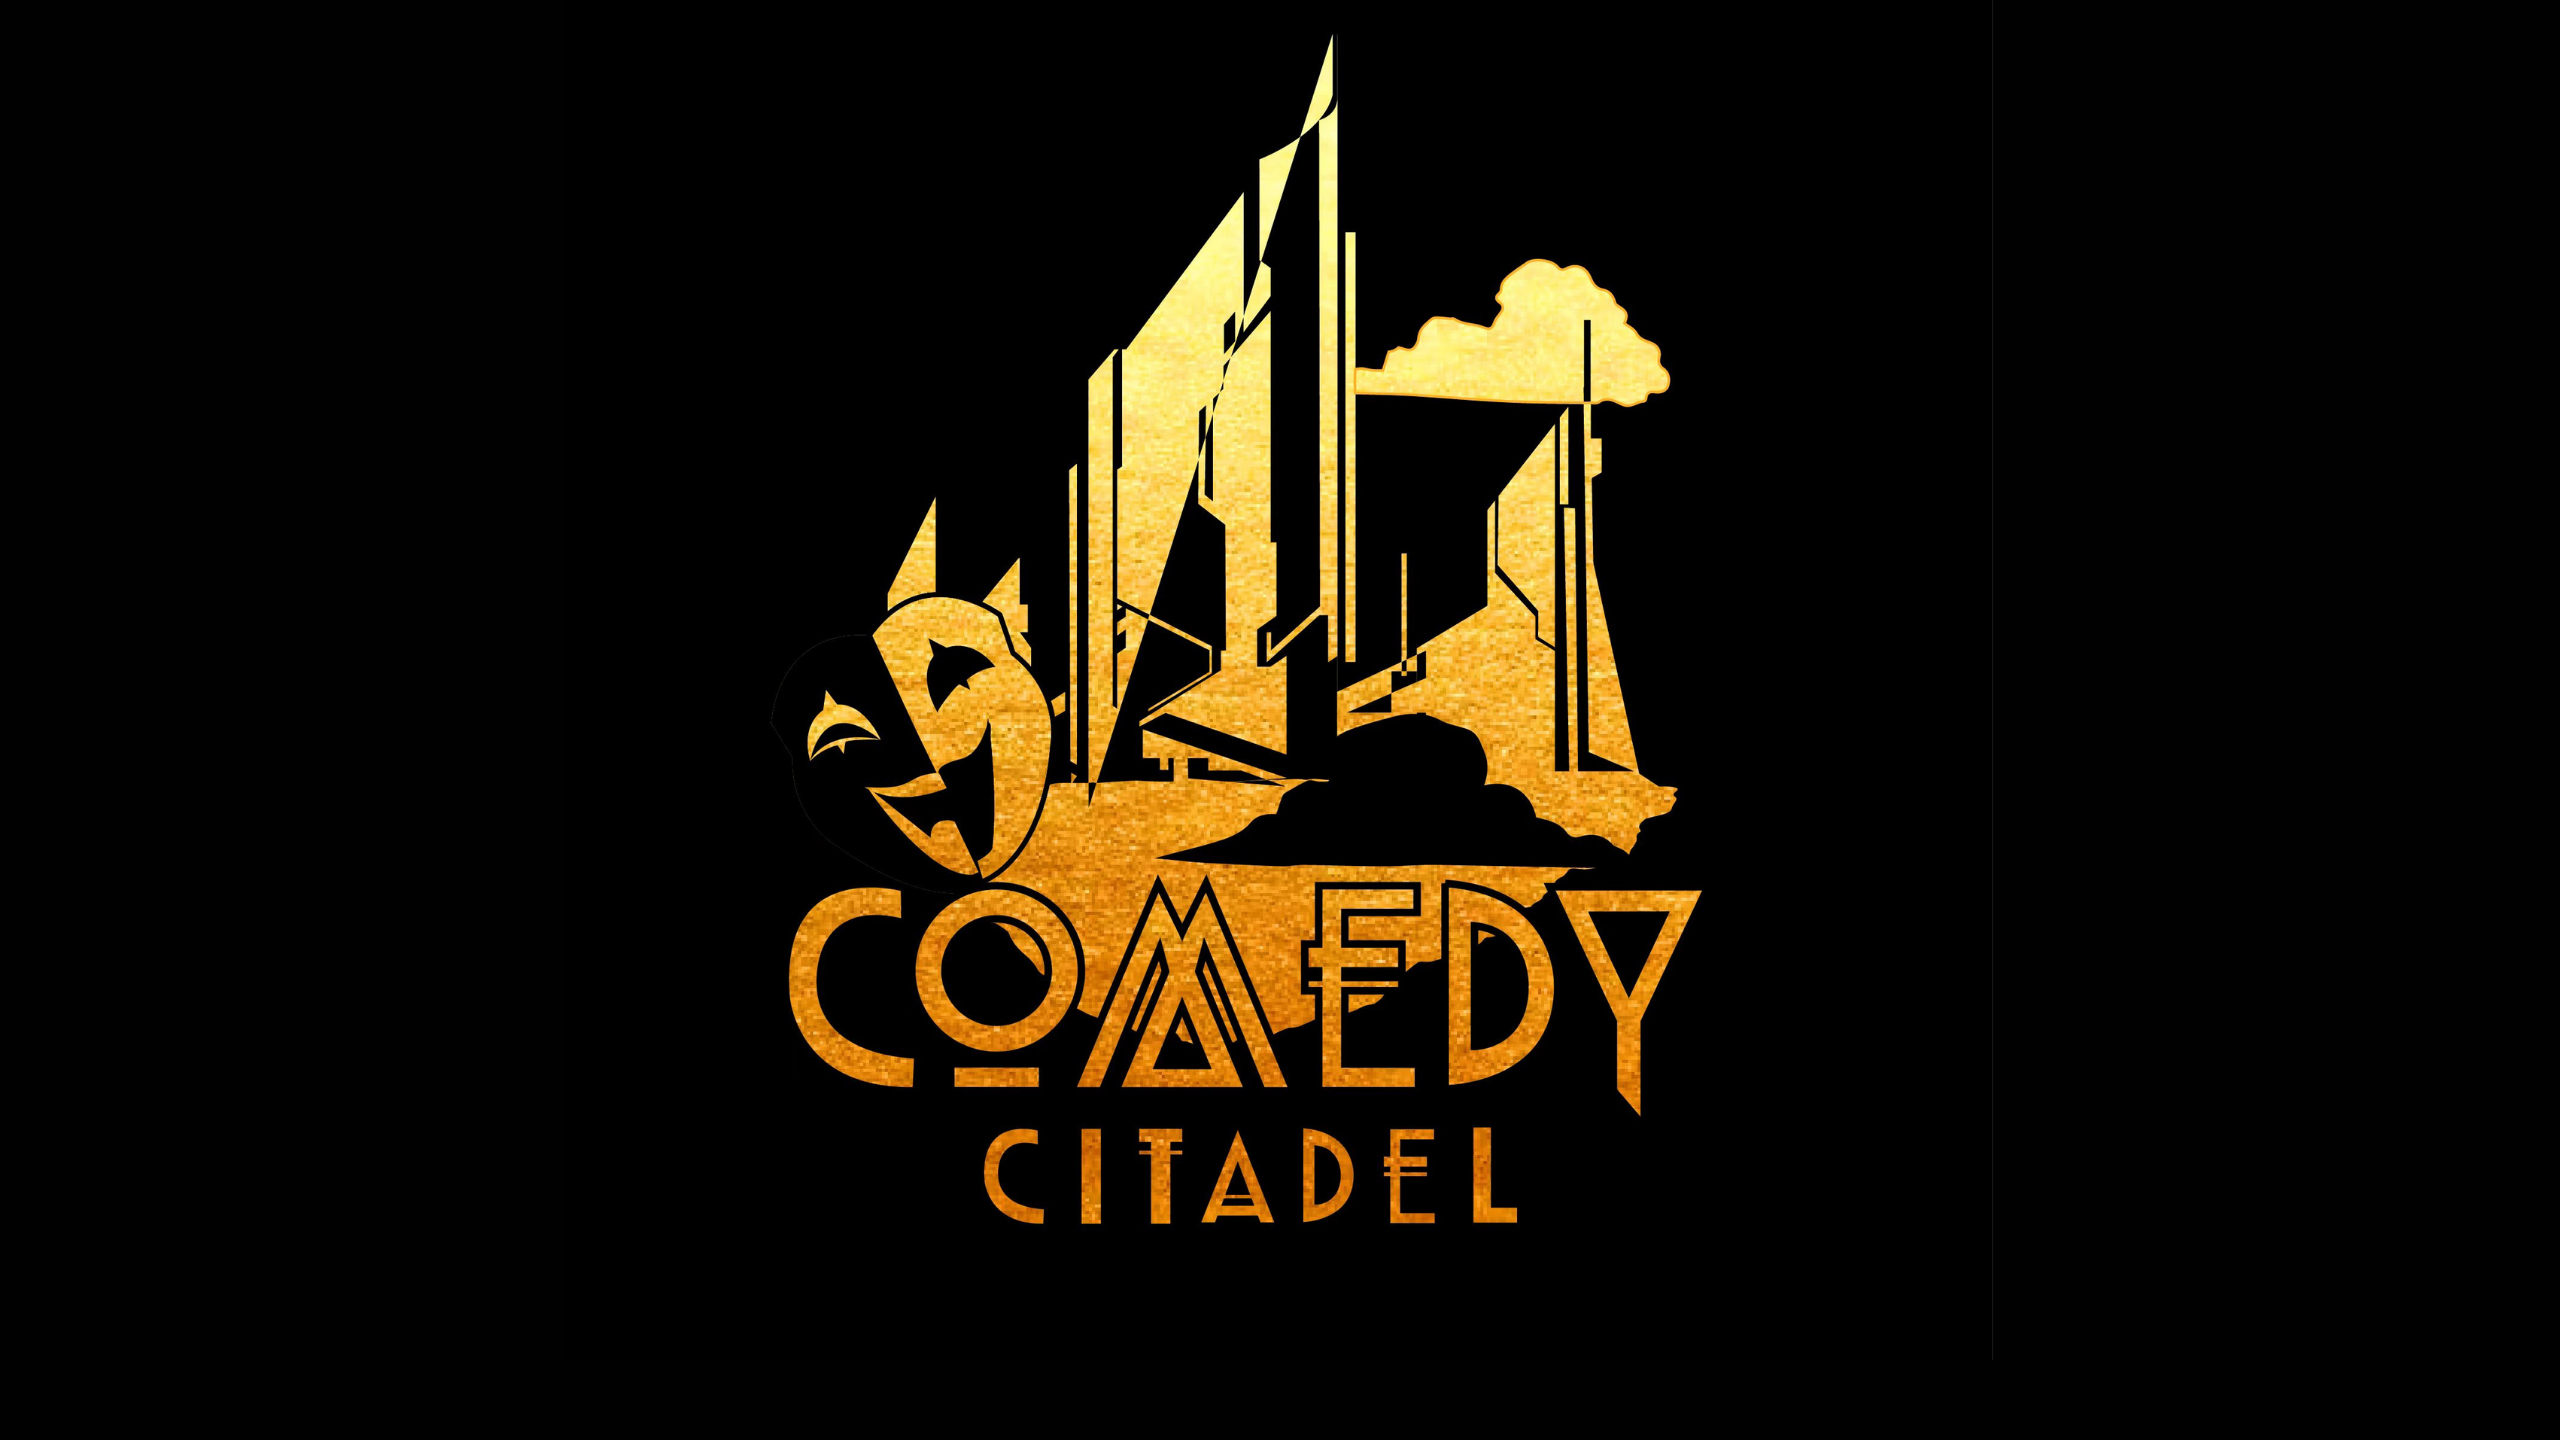 New Comedy Club The Comedy Citadel Has Big Plans for the Capital